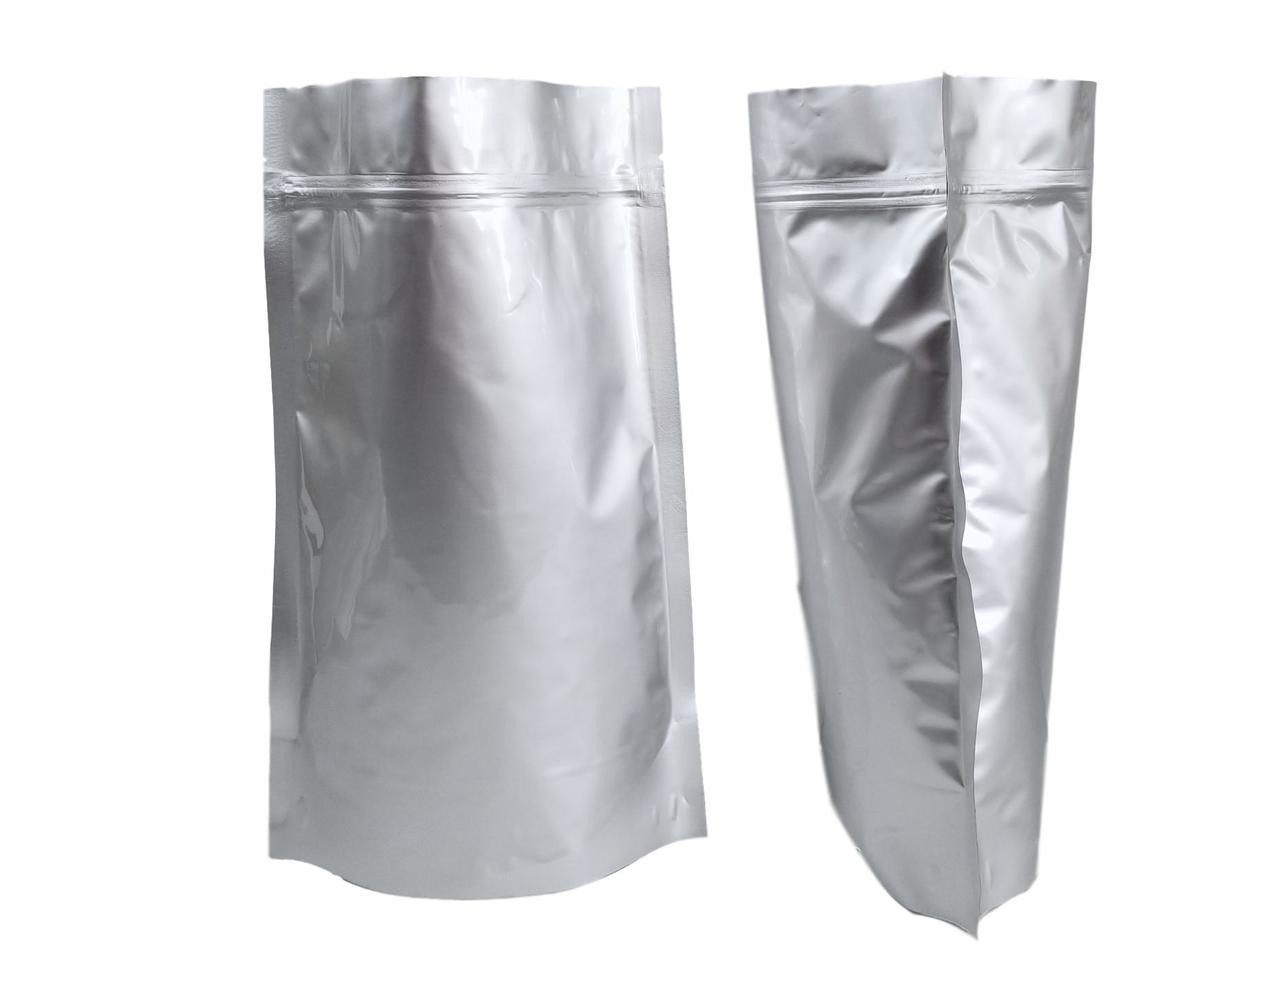 10 Wallaby MRE Mylar Bags with Zipper - Bundle - 0.35 Gallon (7.5 mil) with 10 400cc - Silver, Size: 10 Pack